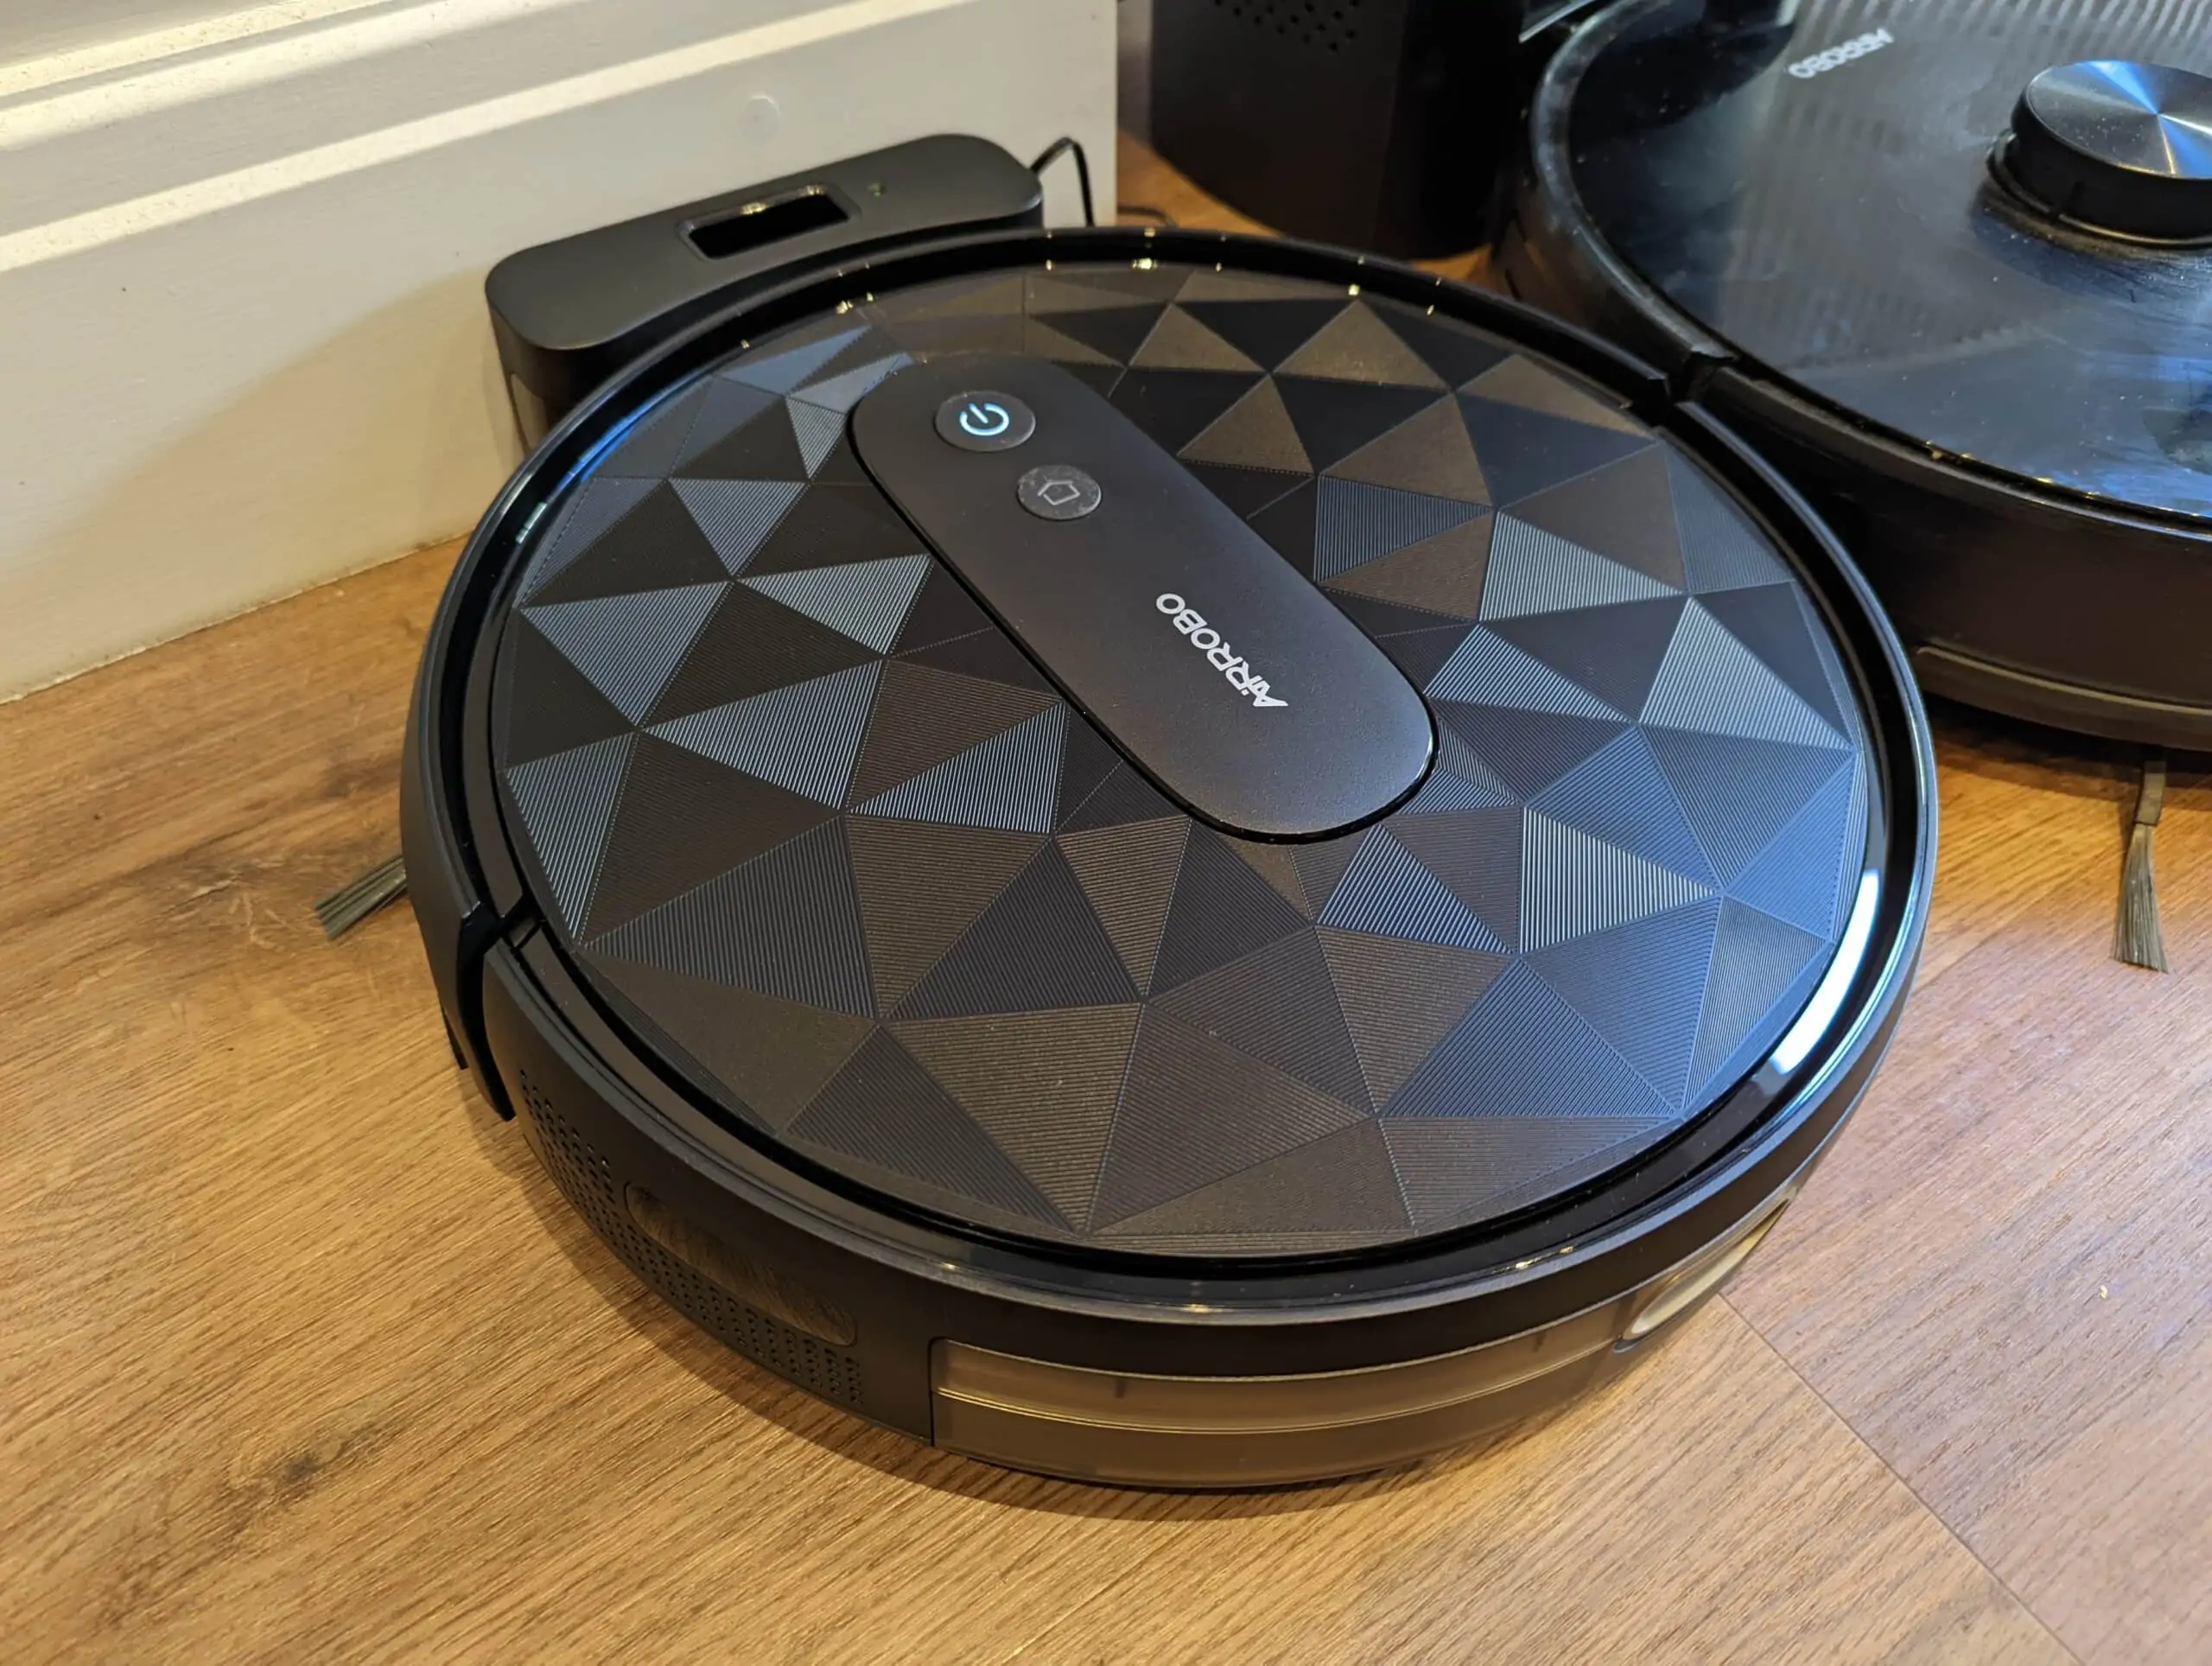 AIRROBO P20 Robot Vacuum Review – A budget option with gyroscope navigation & improved cleaning vs P10